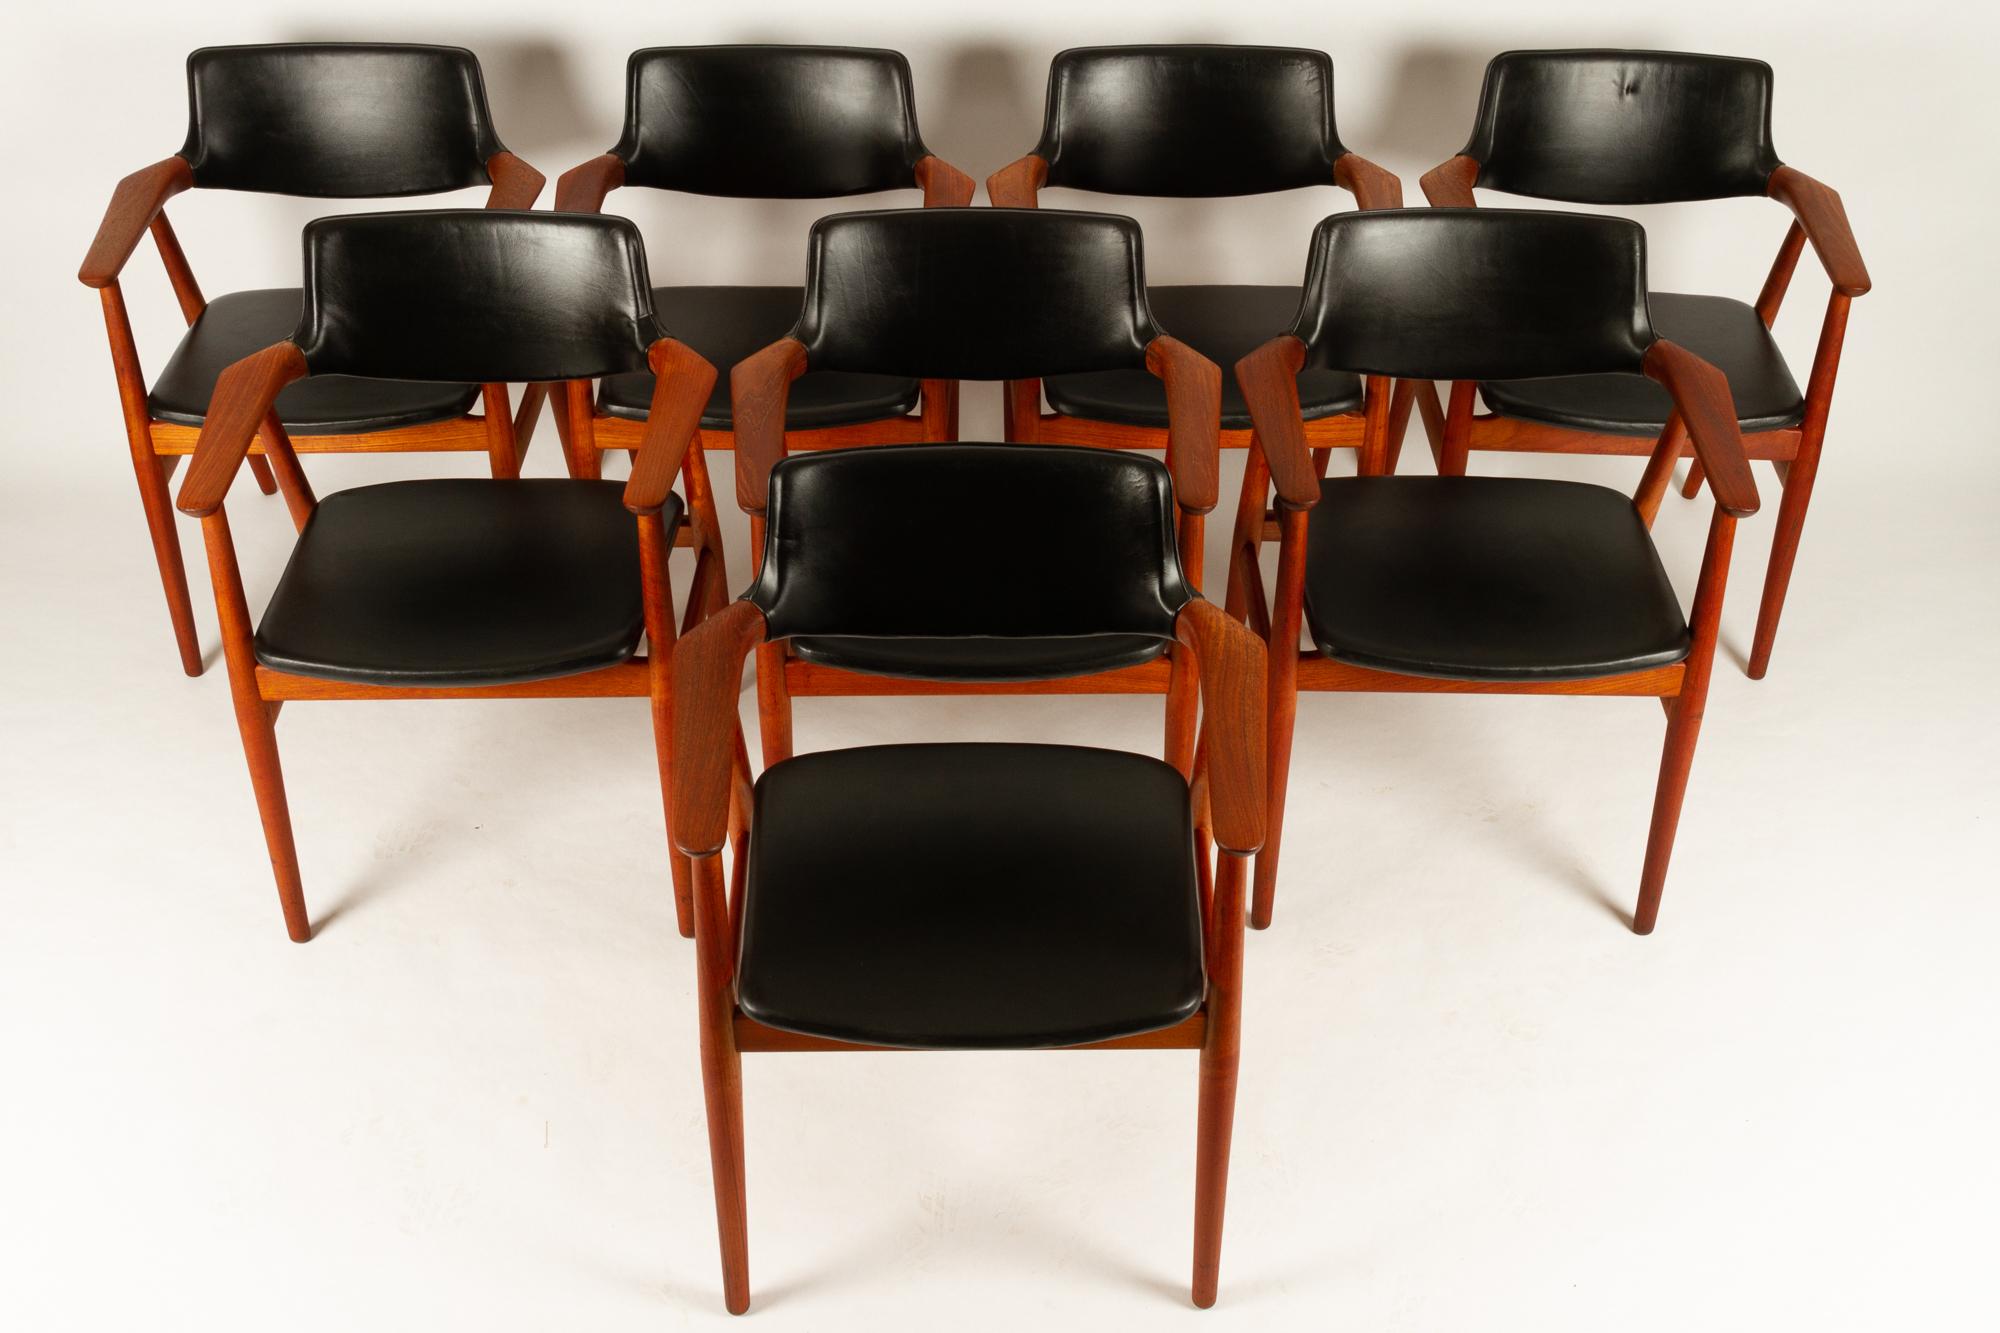 Vintage Danish teak armchairs by Svend Aage Eriksen for Glostrup Møbelfabrik 1960s set of 8.
Beautiful Danish midcentury design. Model GM 11 in solid teak and original black leather upholstery. Round tapered legs and sculpted armrests. Wide curved